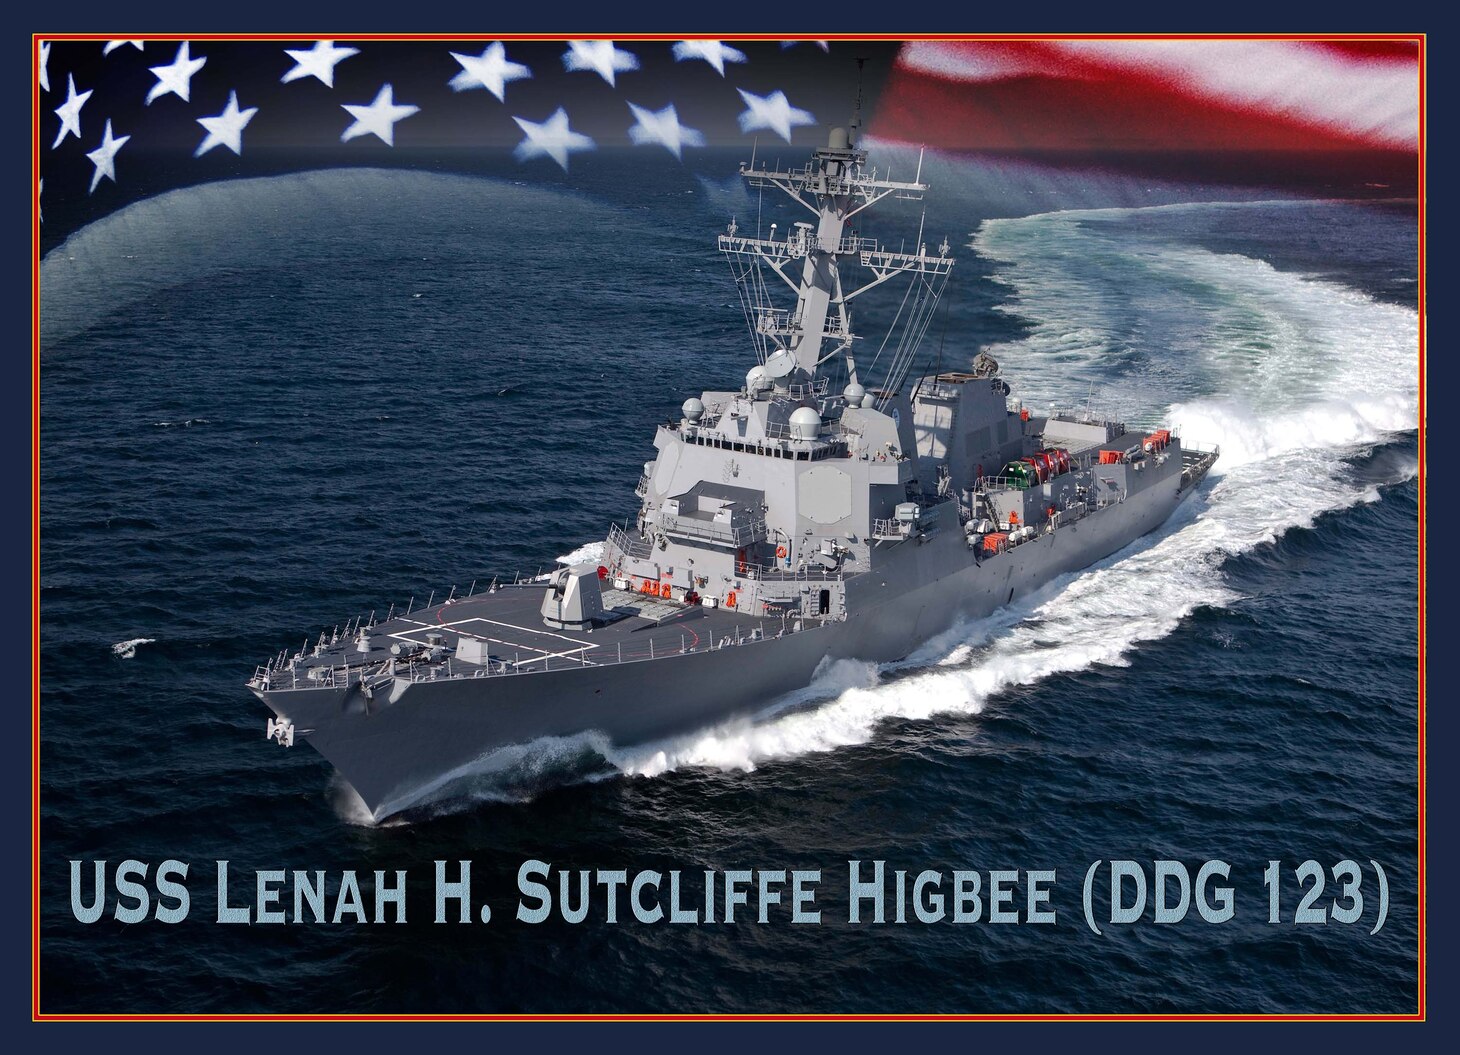 A graphic representation of the future guided-missile destroyer USS Lenah H. Sutcliffe Higbee (DDG 123).